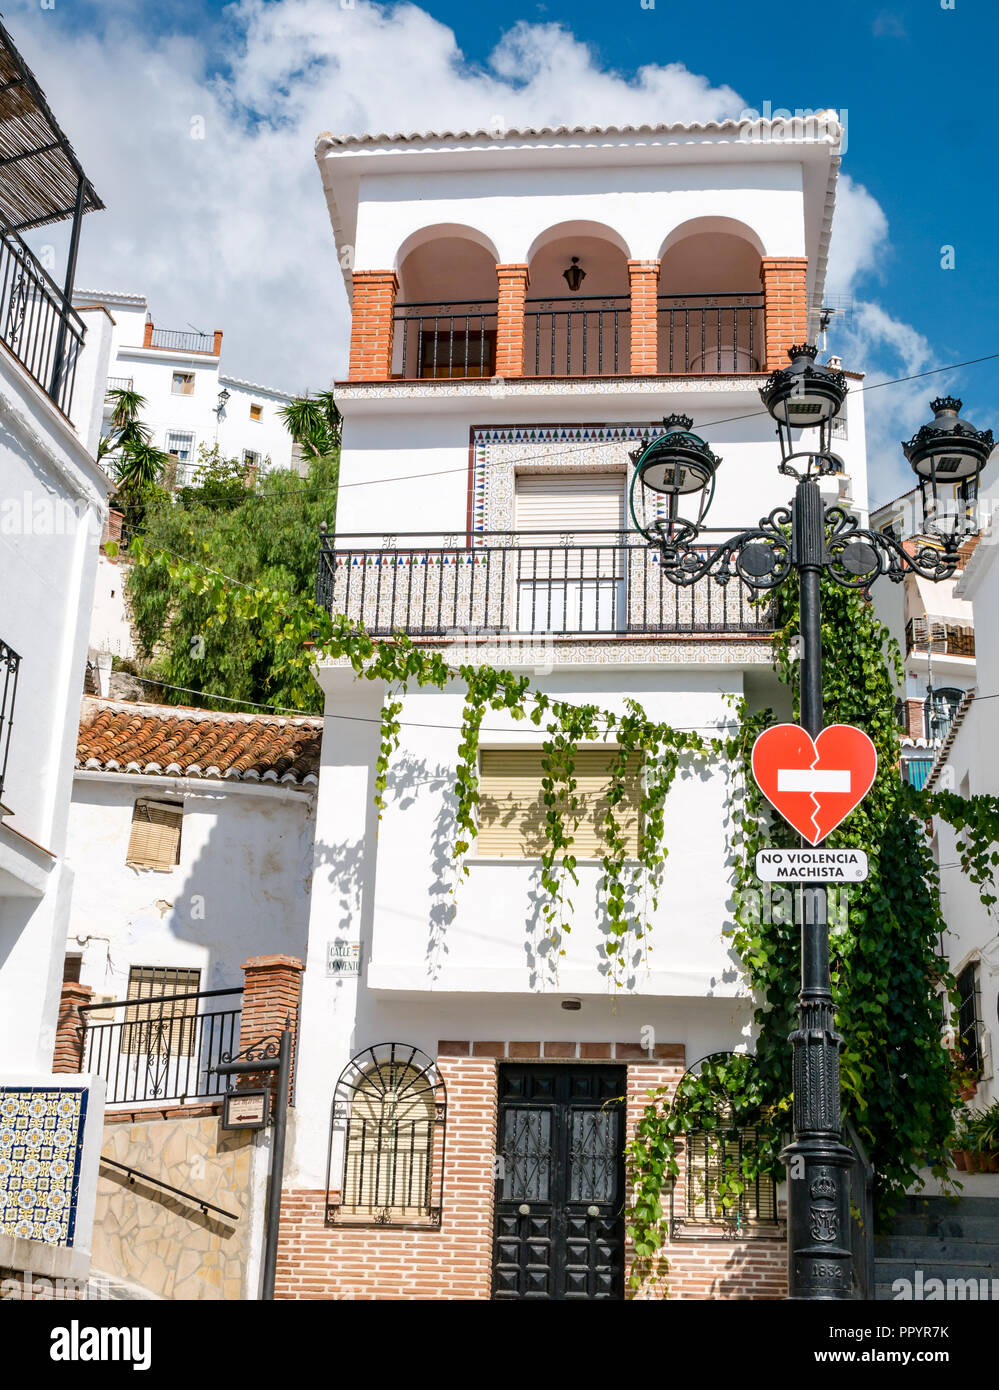 Pretty white houses with zero tolerance of domestic violence sign in Spanish, Canillas de Acientuna, Axarquia, Andalusia, Spain Stock Photo